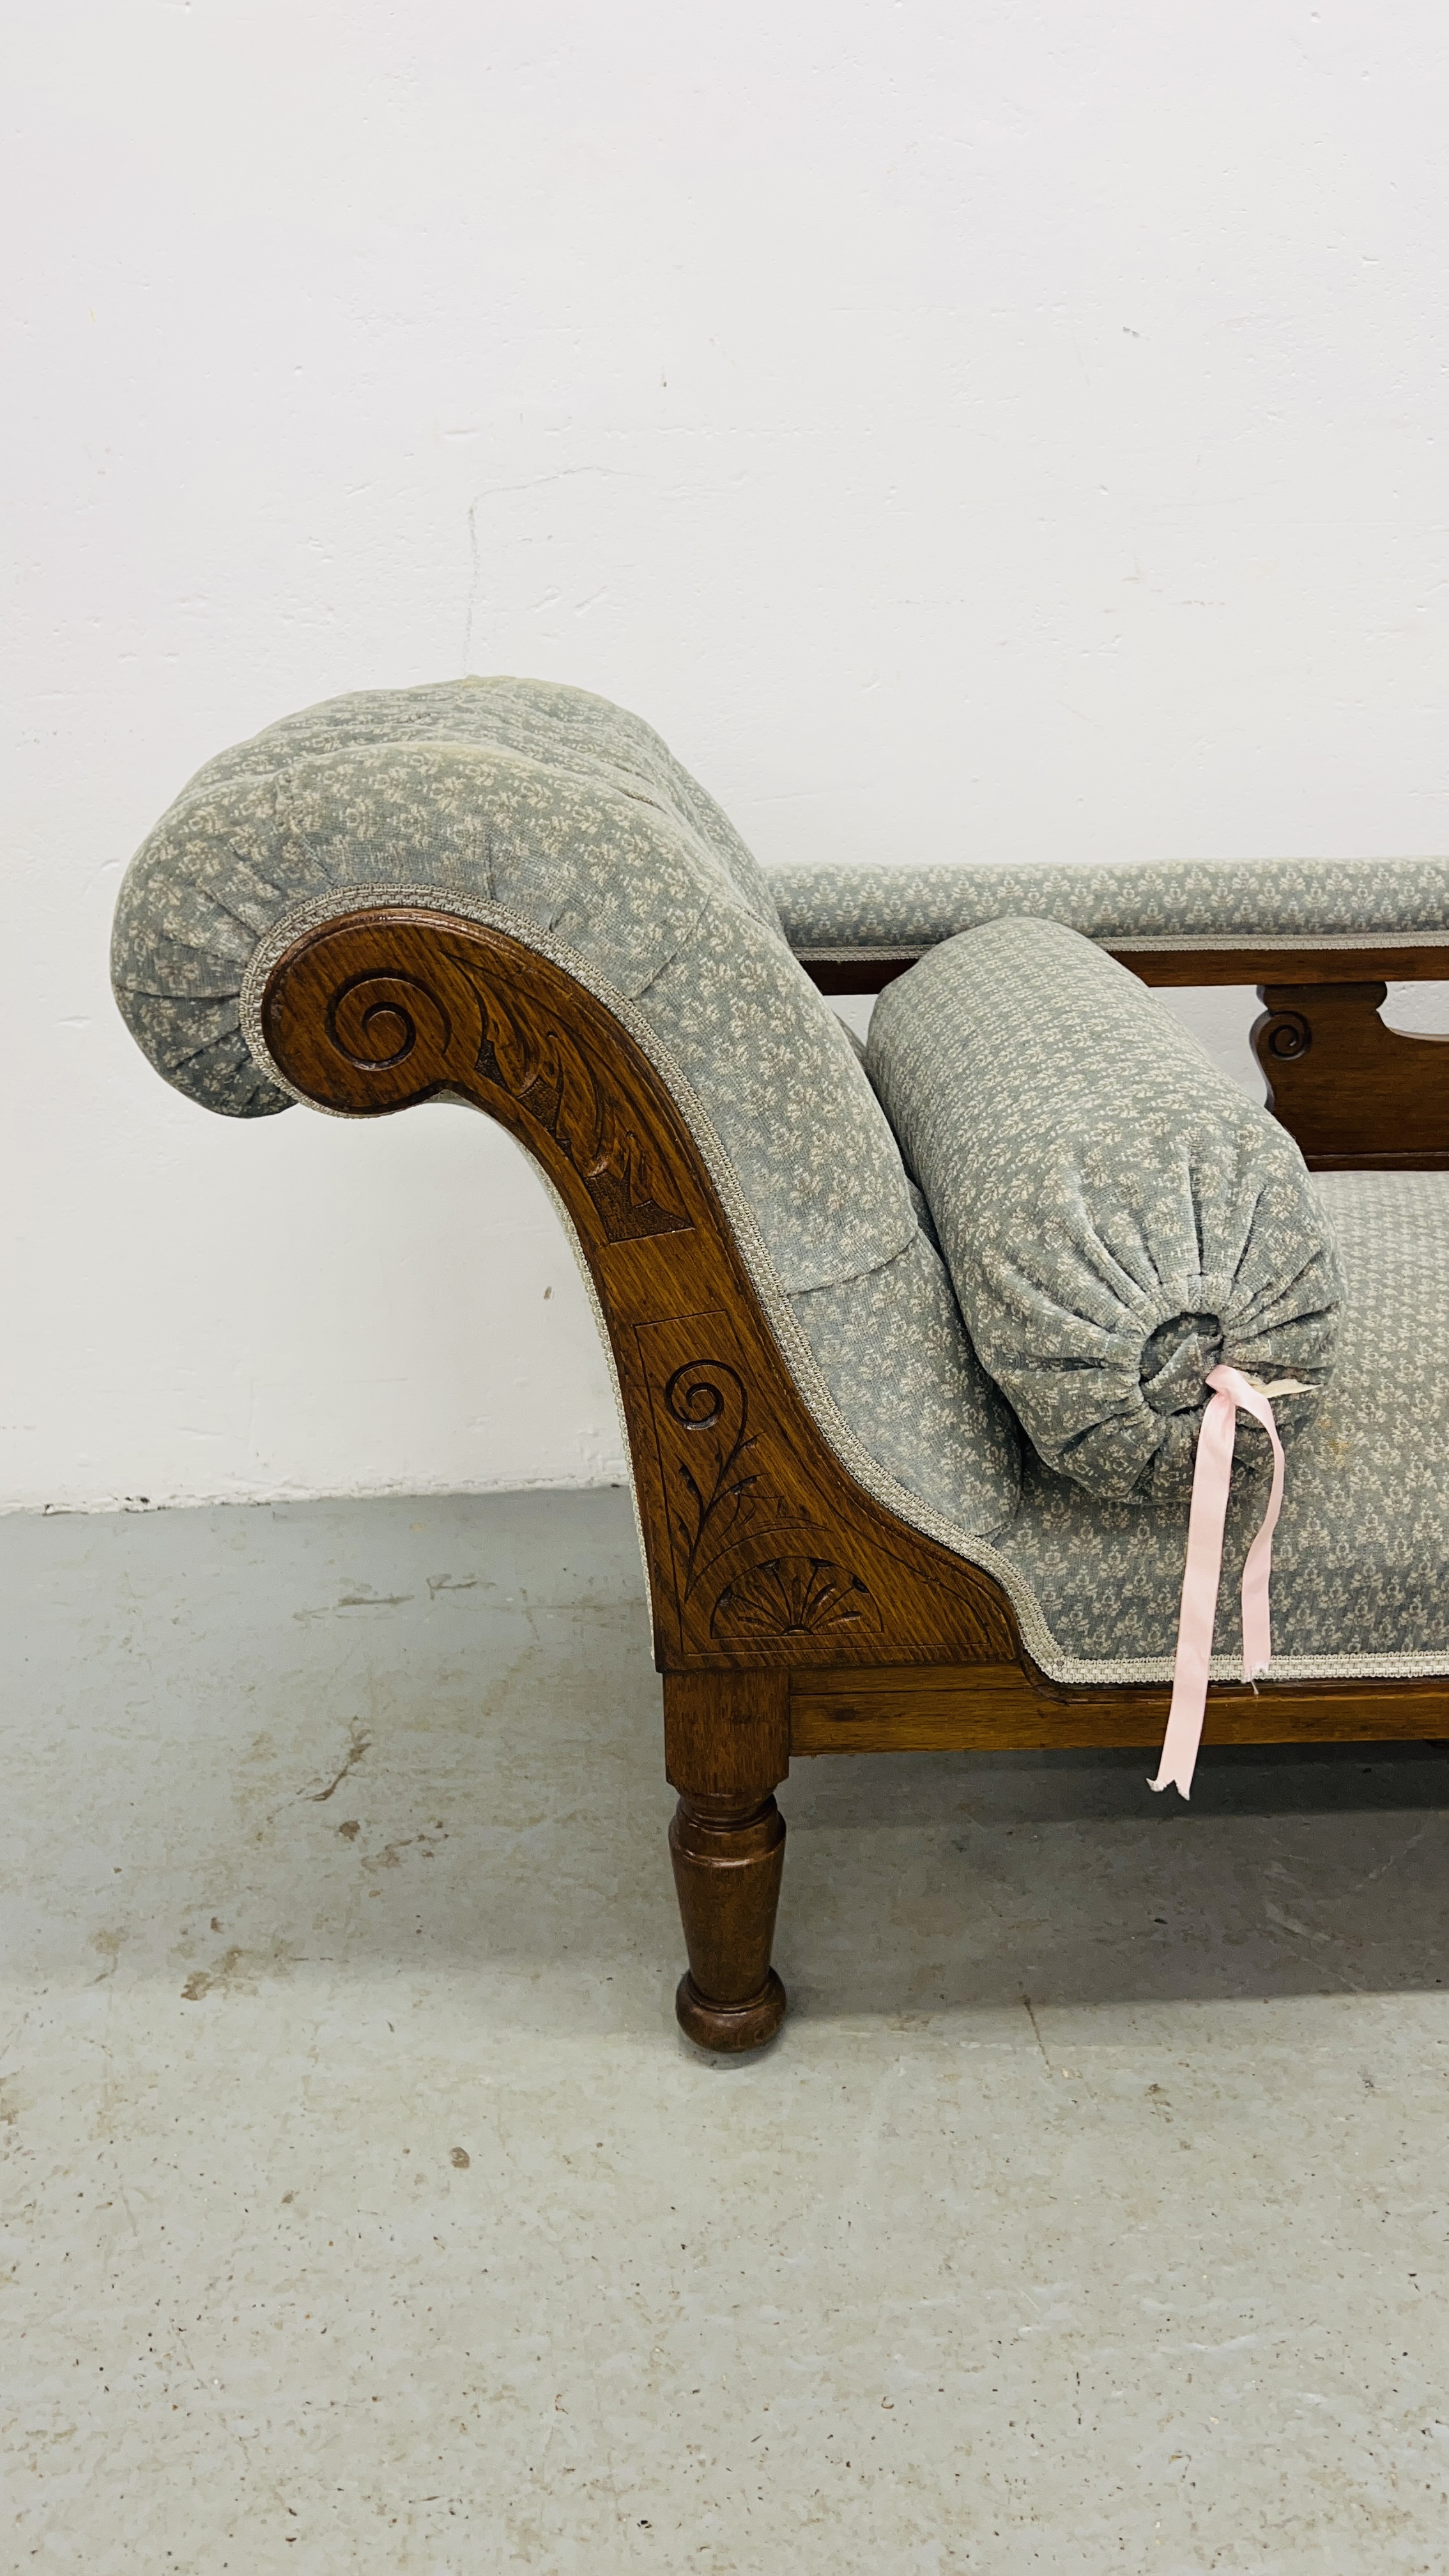 AN EDWARDIAN OAK CHAISE LONGUE UPHOLSTERED IN PASTEL BLUE - Image 5 of 8